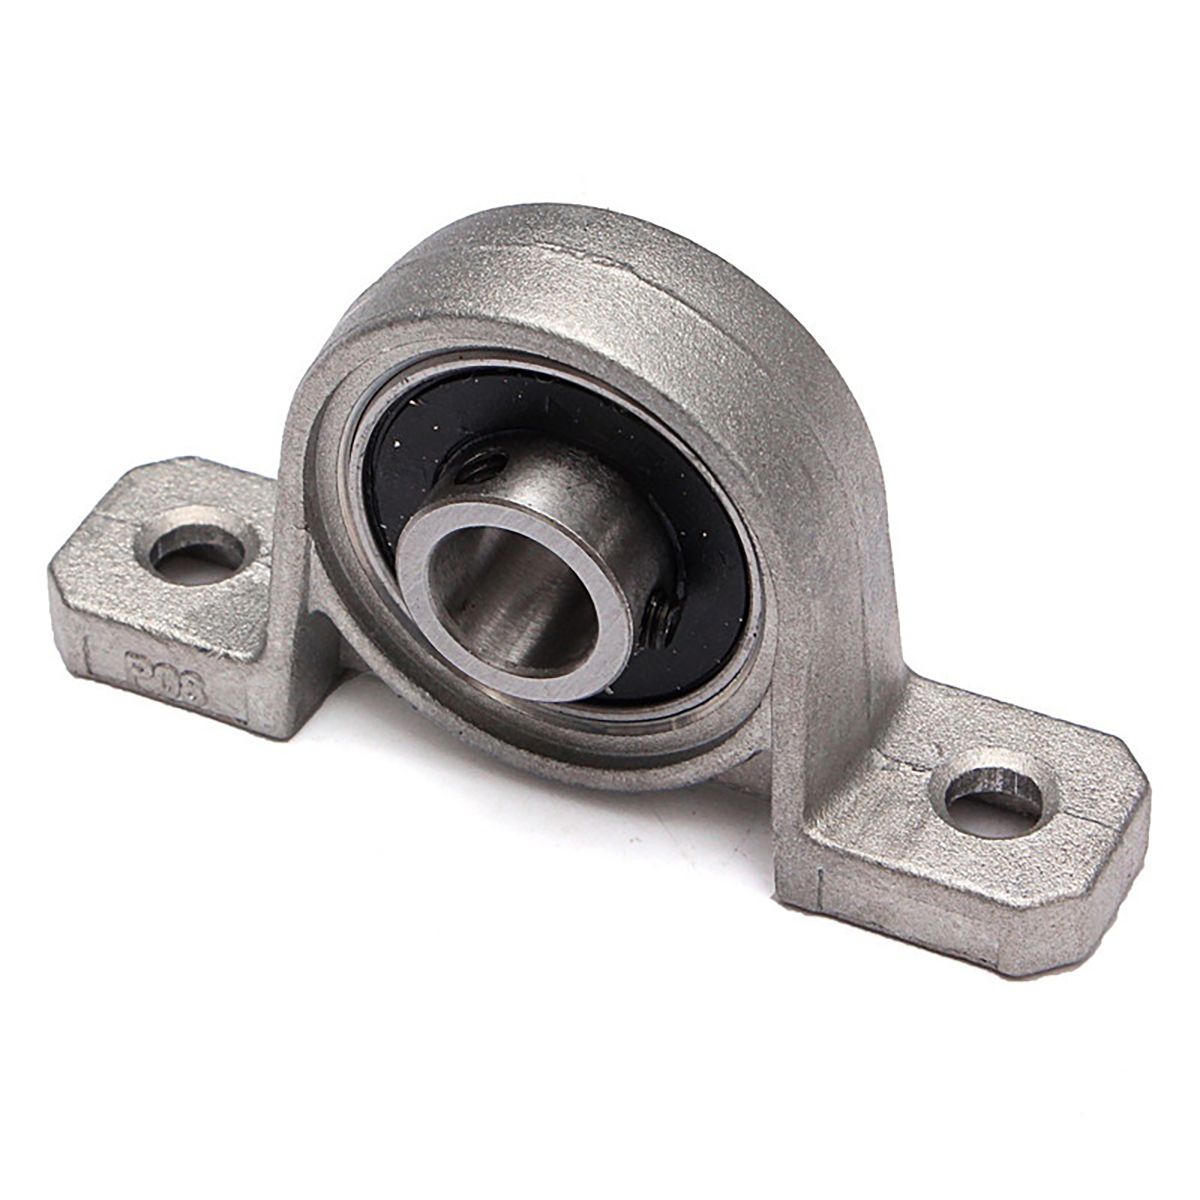 Machifit-T8-100-1000mm-Stainless-Steel-Lead-Screw-with-Shaft-Coupling-and-Mounting-Support-CNC-Parts-1646537